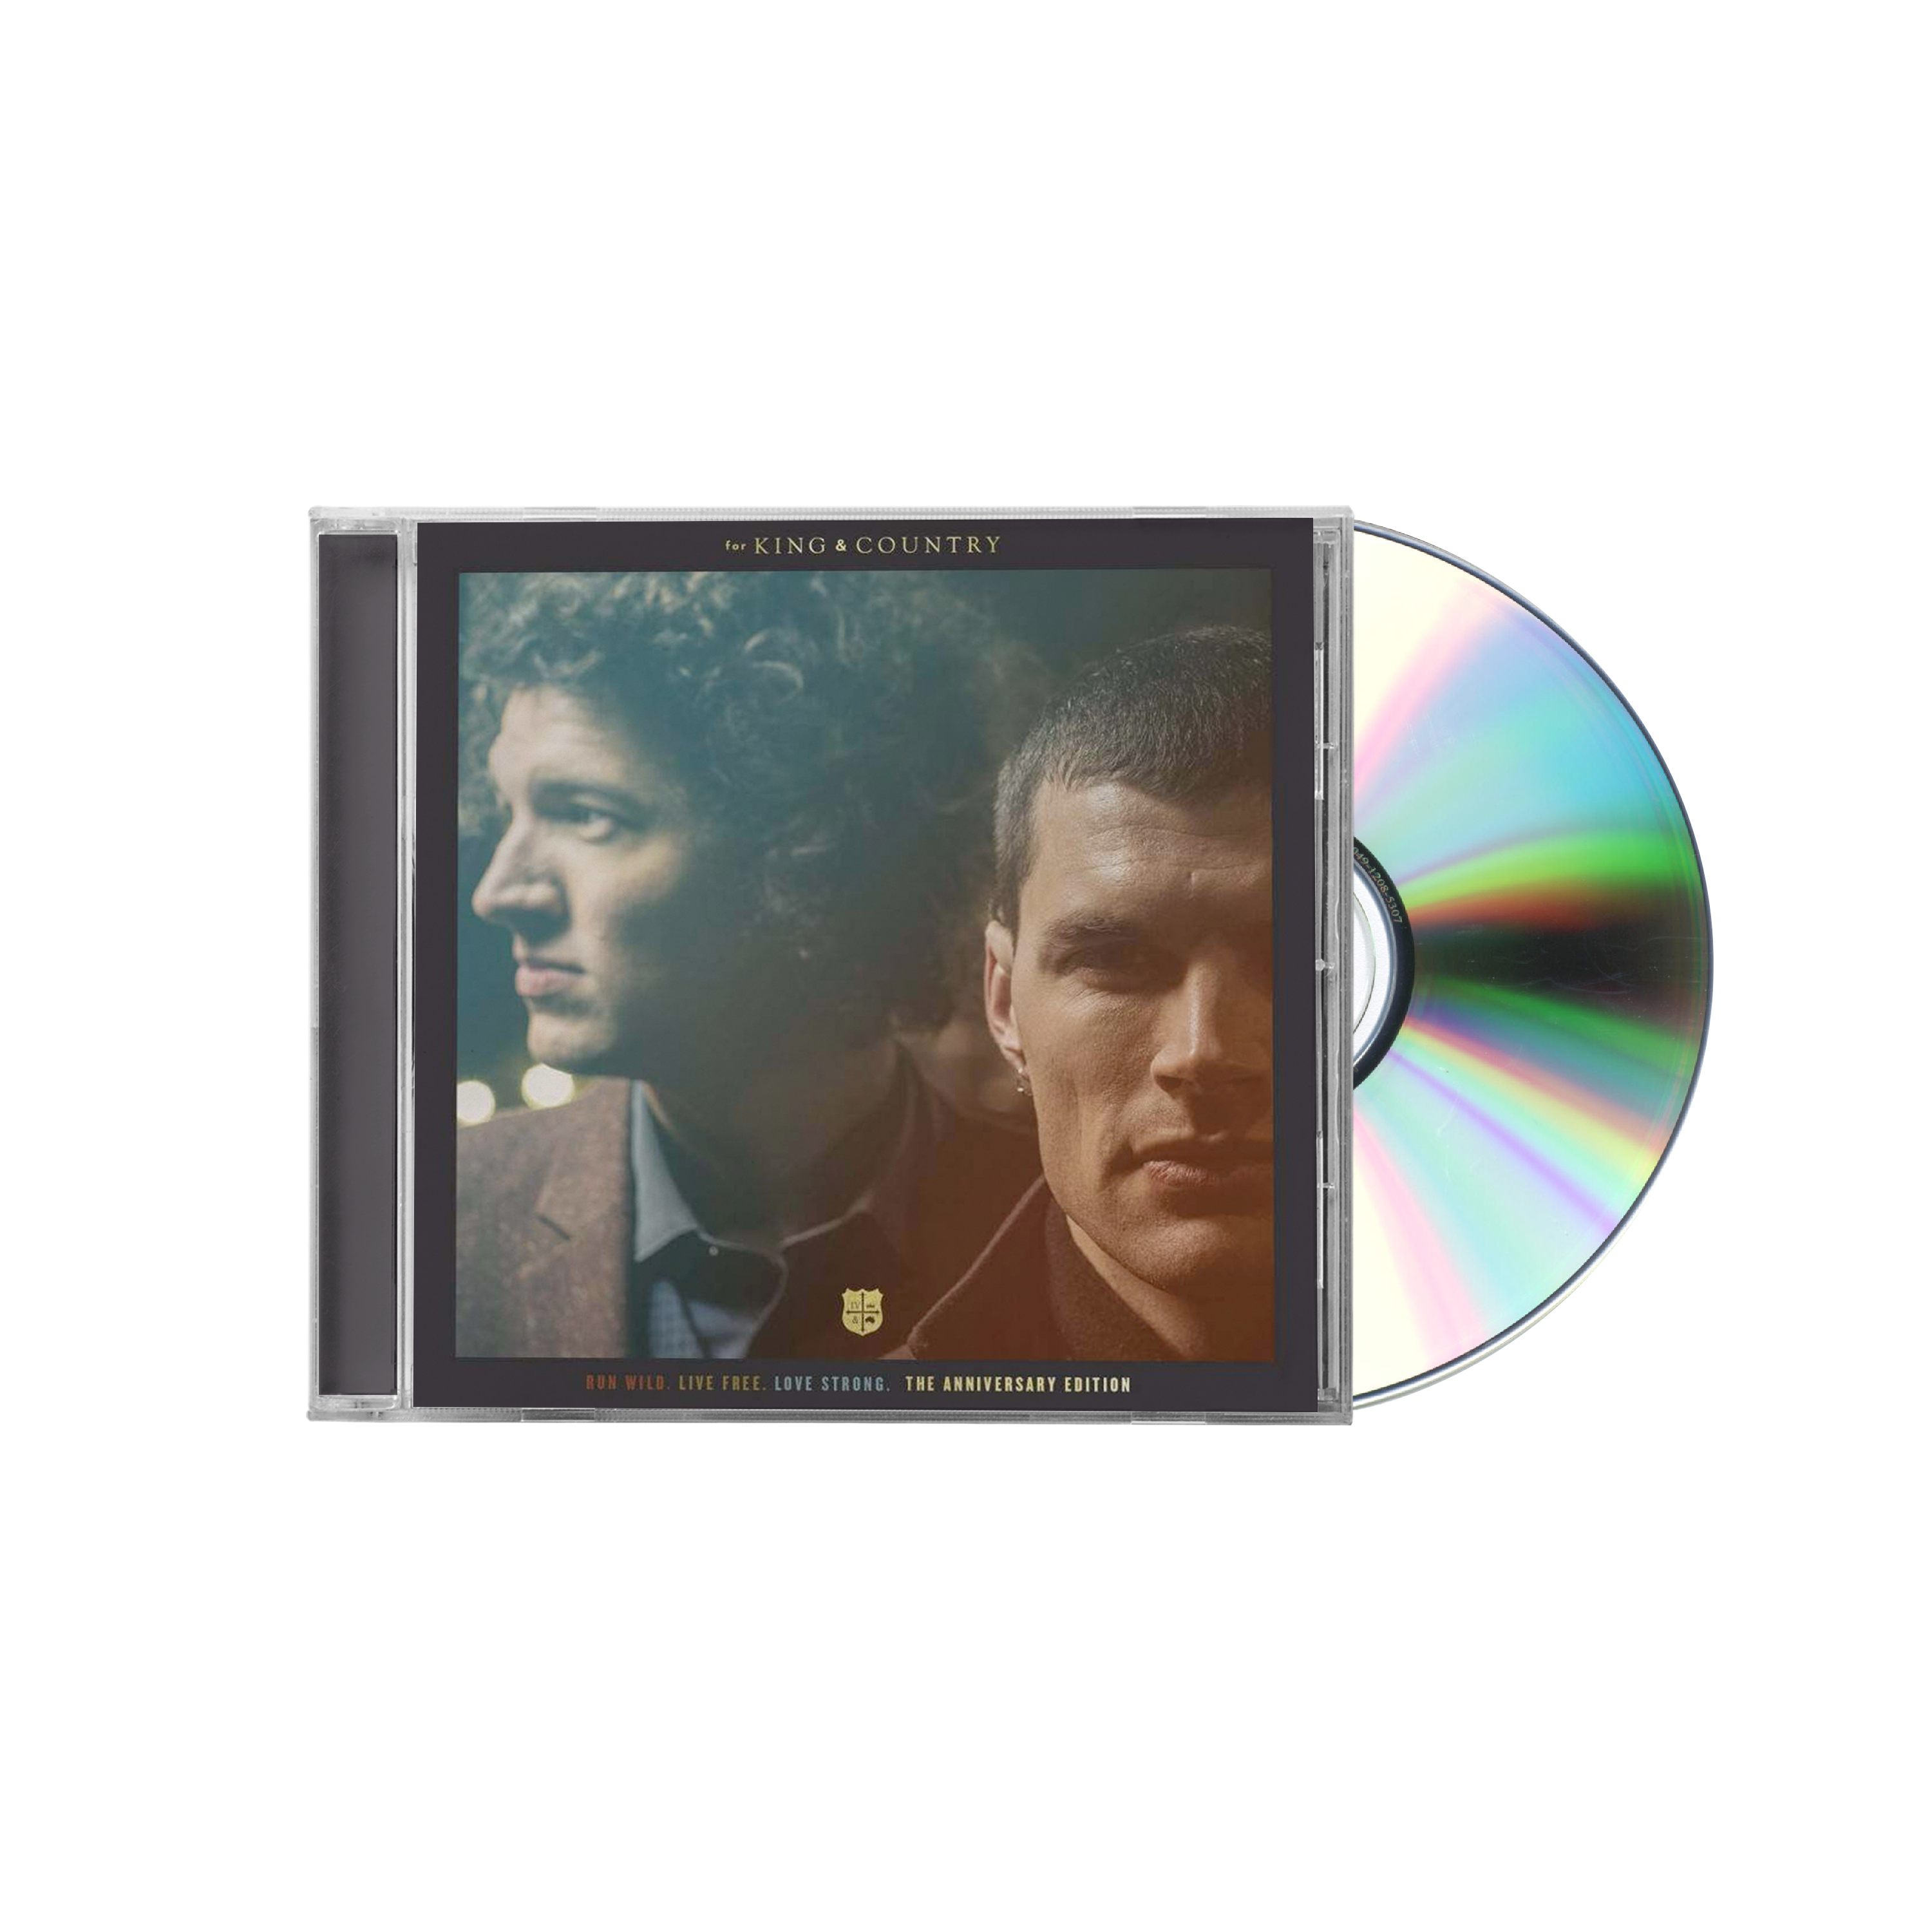 Run wild live free love strong the anniversary edition CD for King and Country